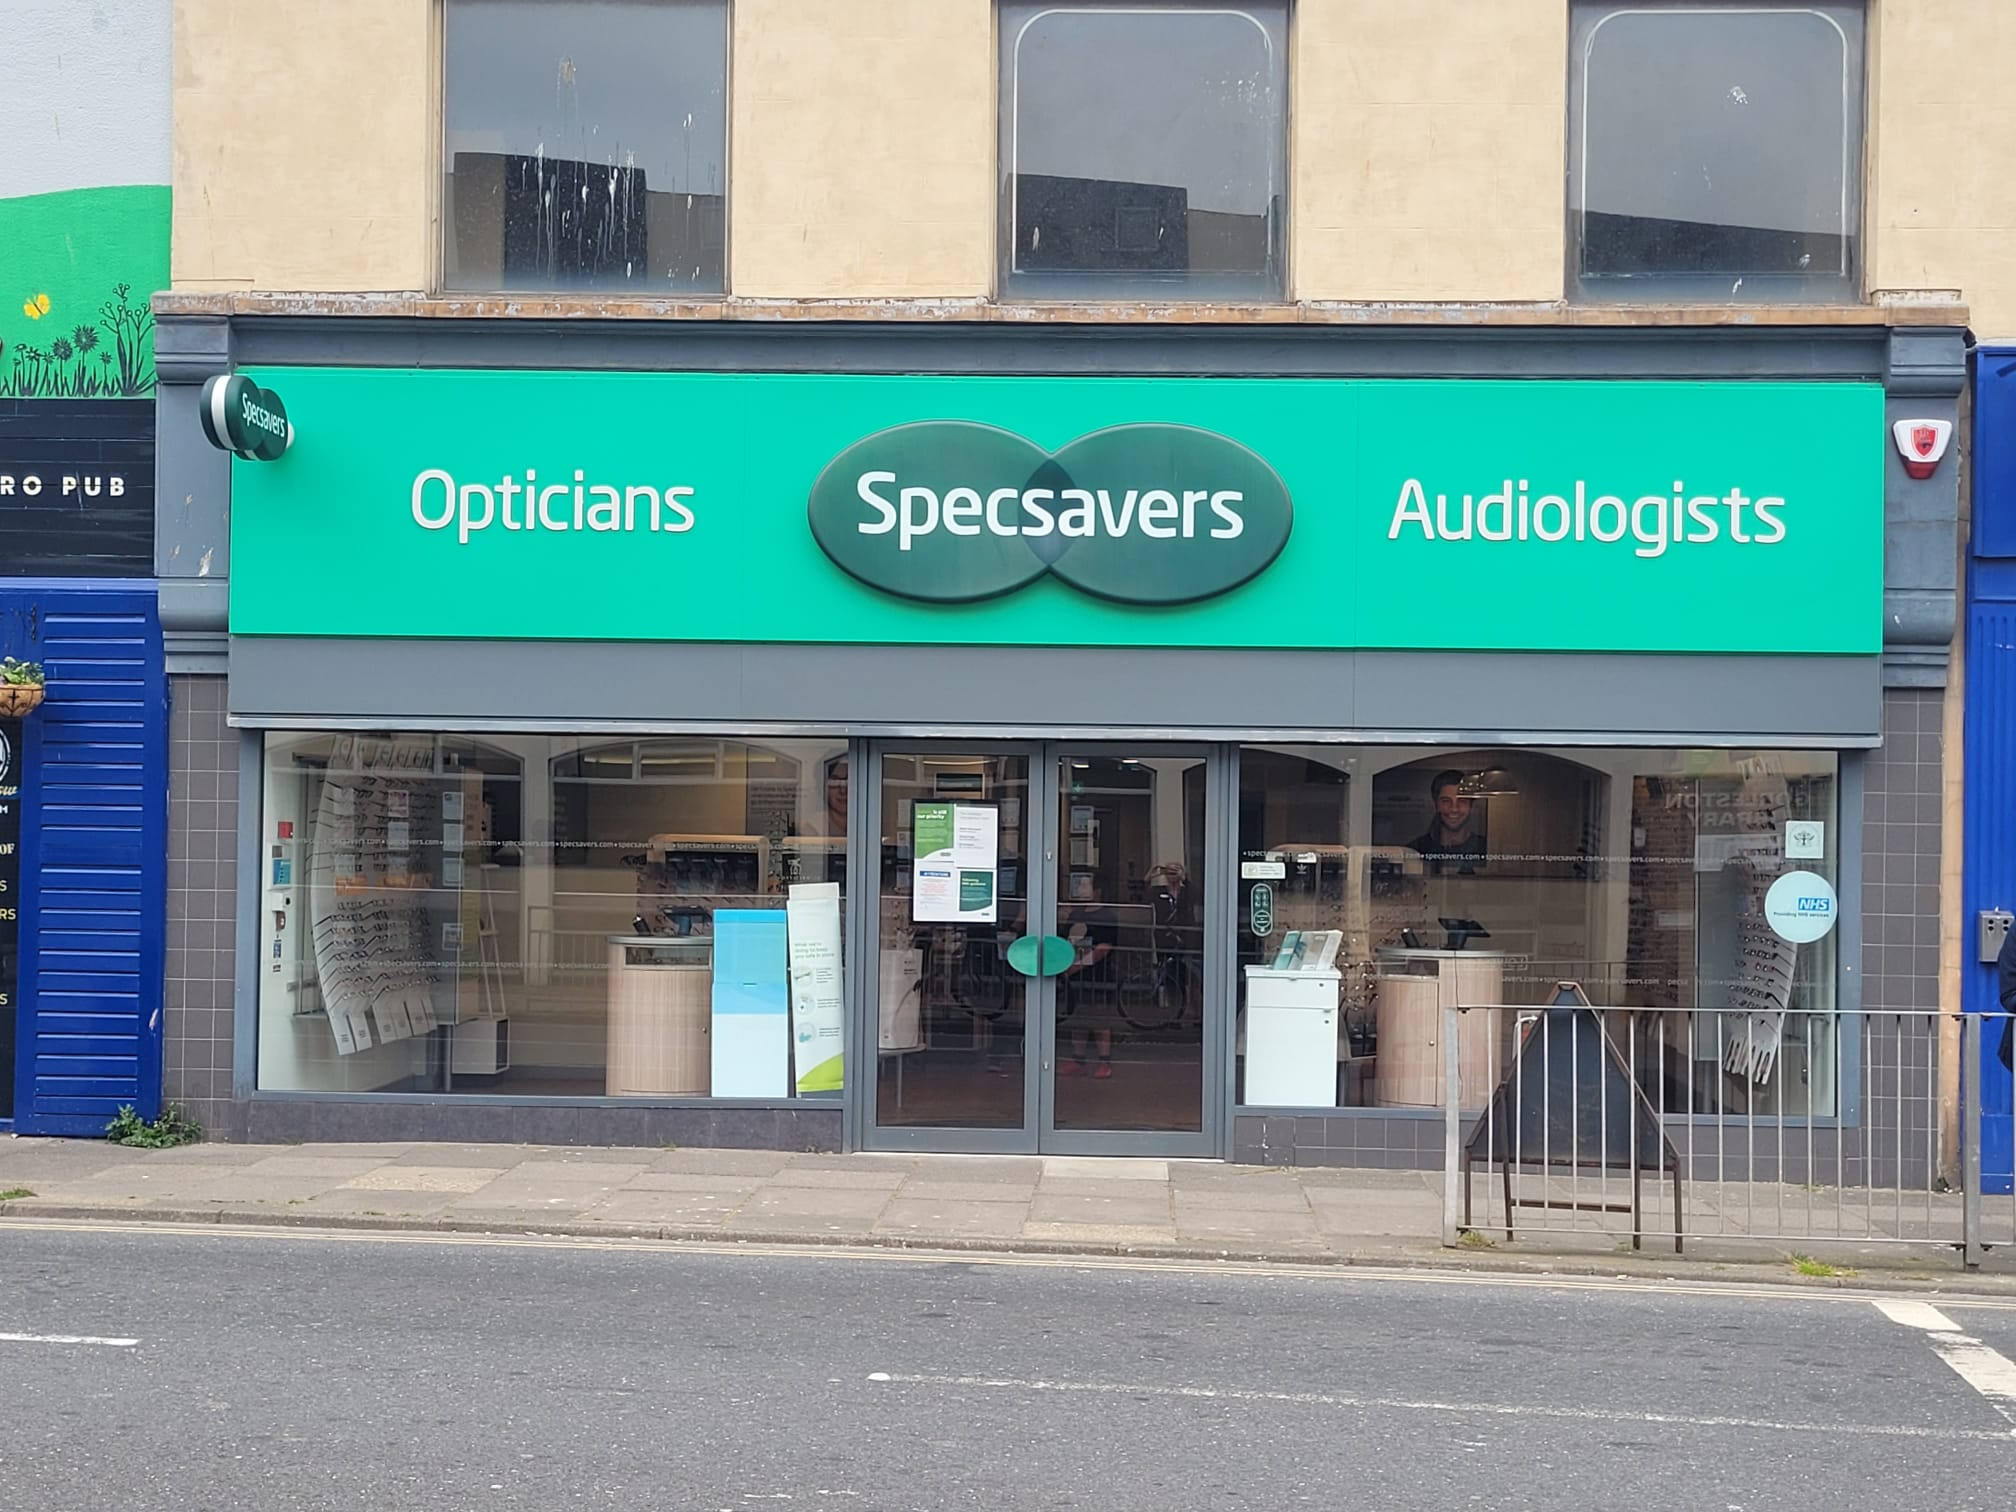 Images Specsavers Opticians and Audiologists - Gorleston